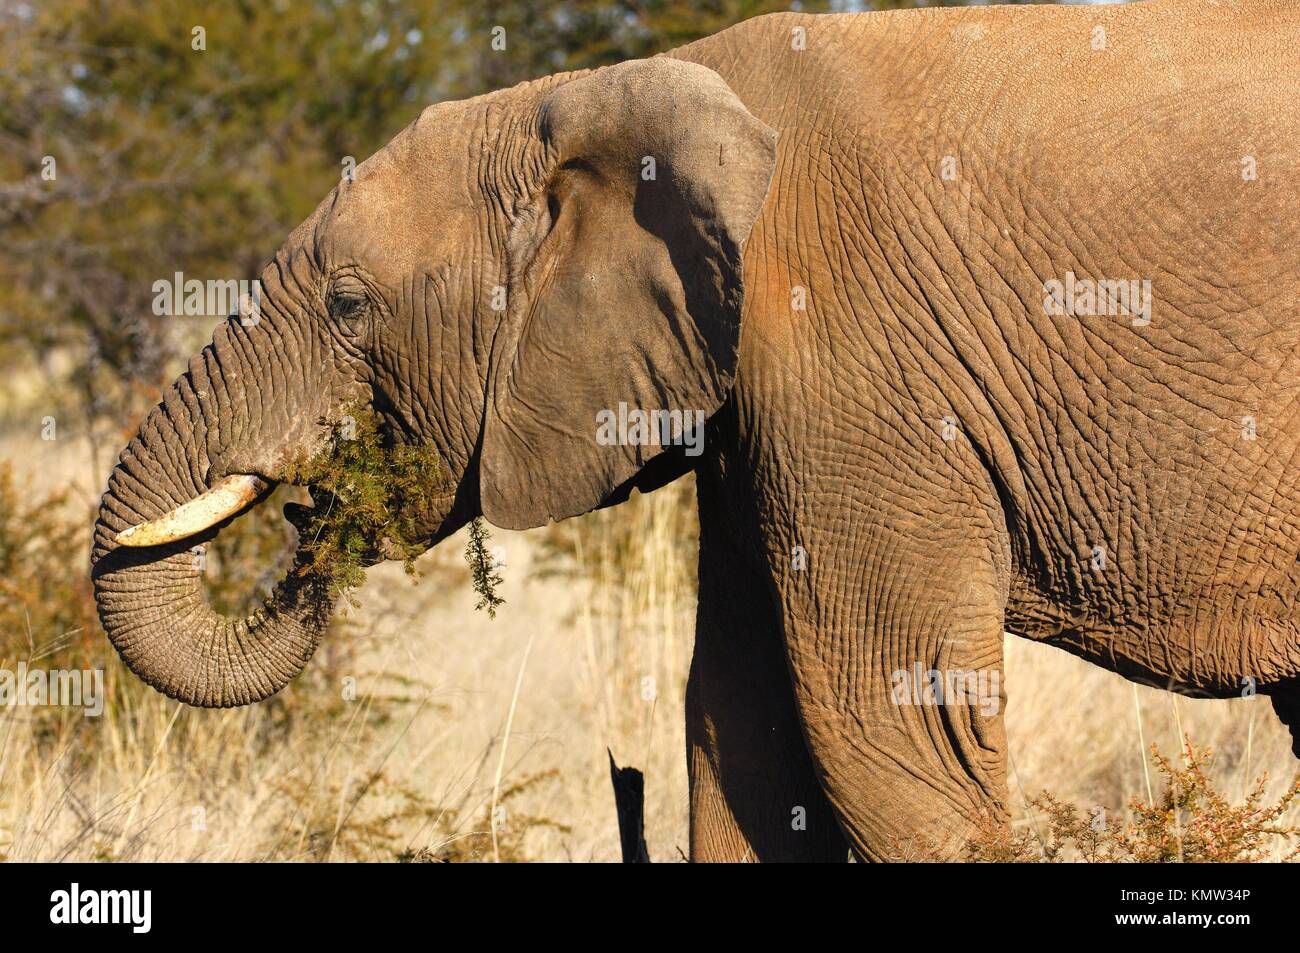 African Elephant foraging on thorn bush branches, Madikwe Game Reserve, South Africa Stock Photo